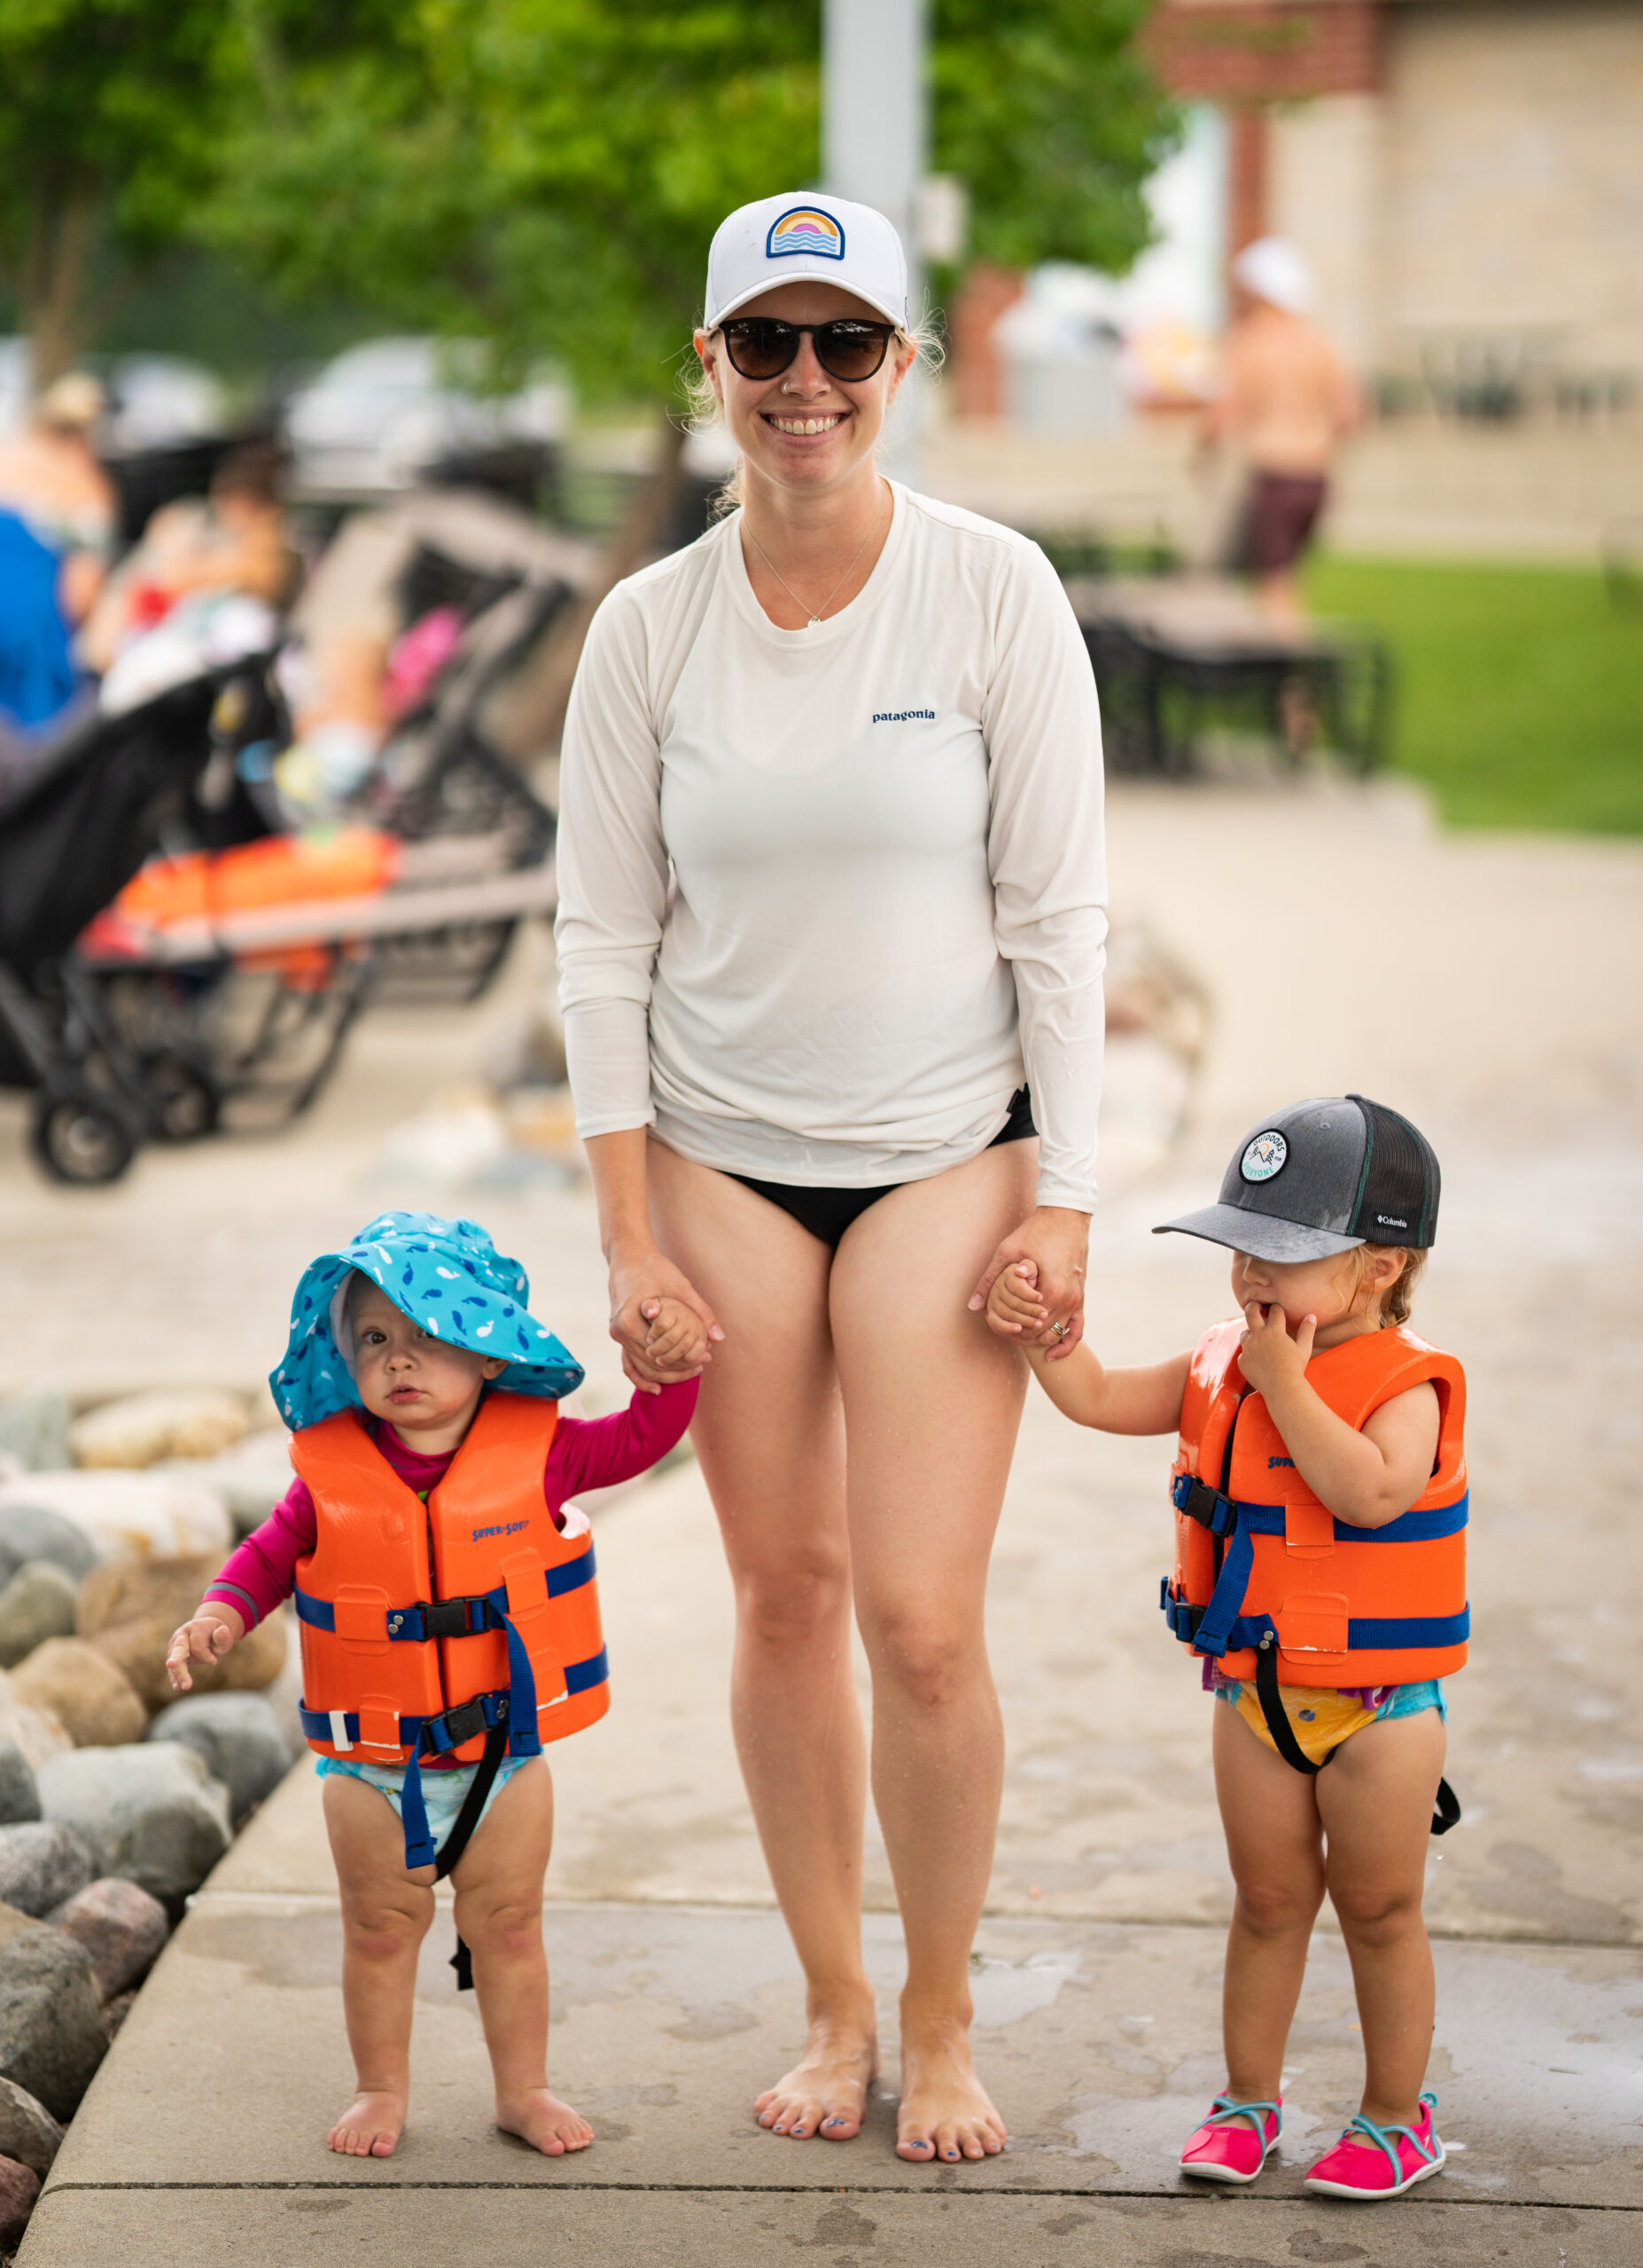 Mom and her two kiddos in life vests make their way to the Kiddie Pool at The Waterpark.